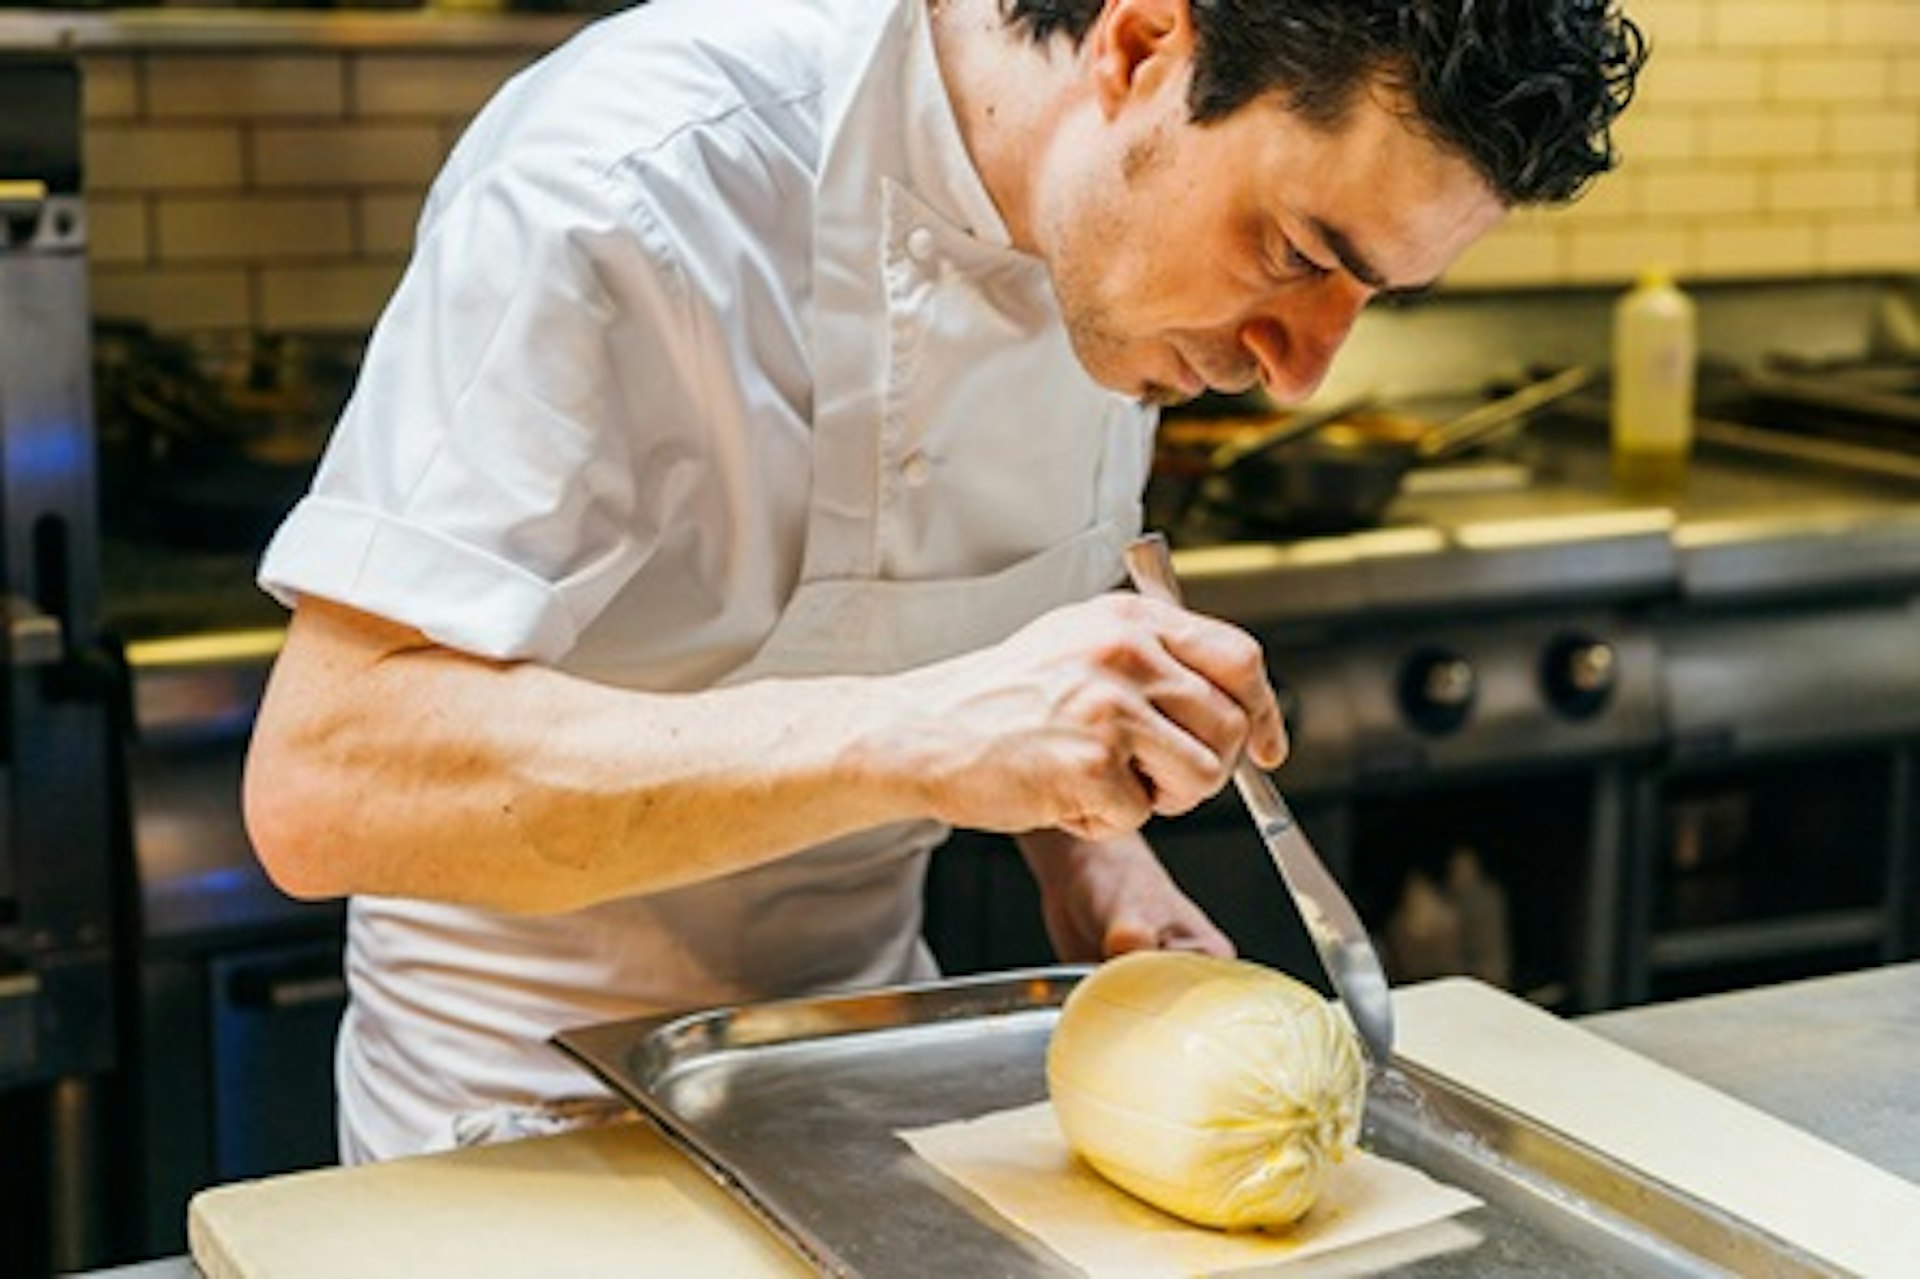 Kitchen Table Experience with Five Course Meal for Four at Gordon Ramsay's Heddon Street Kitchen 1